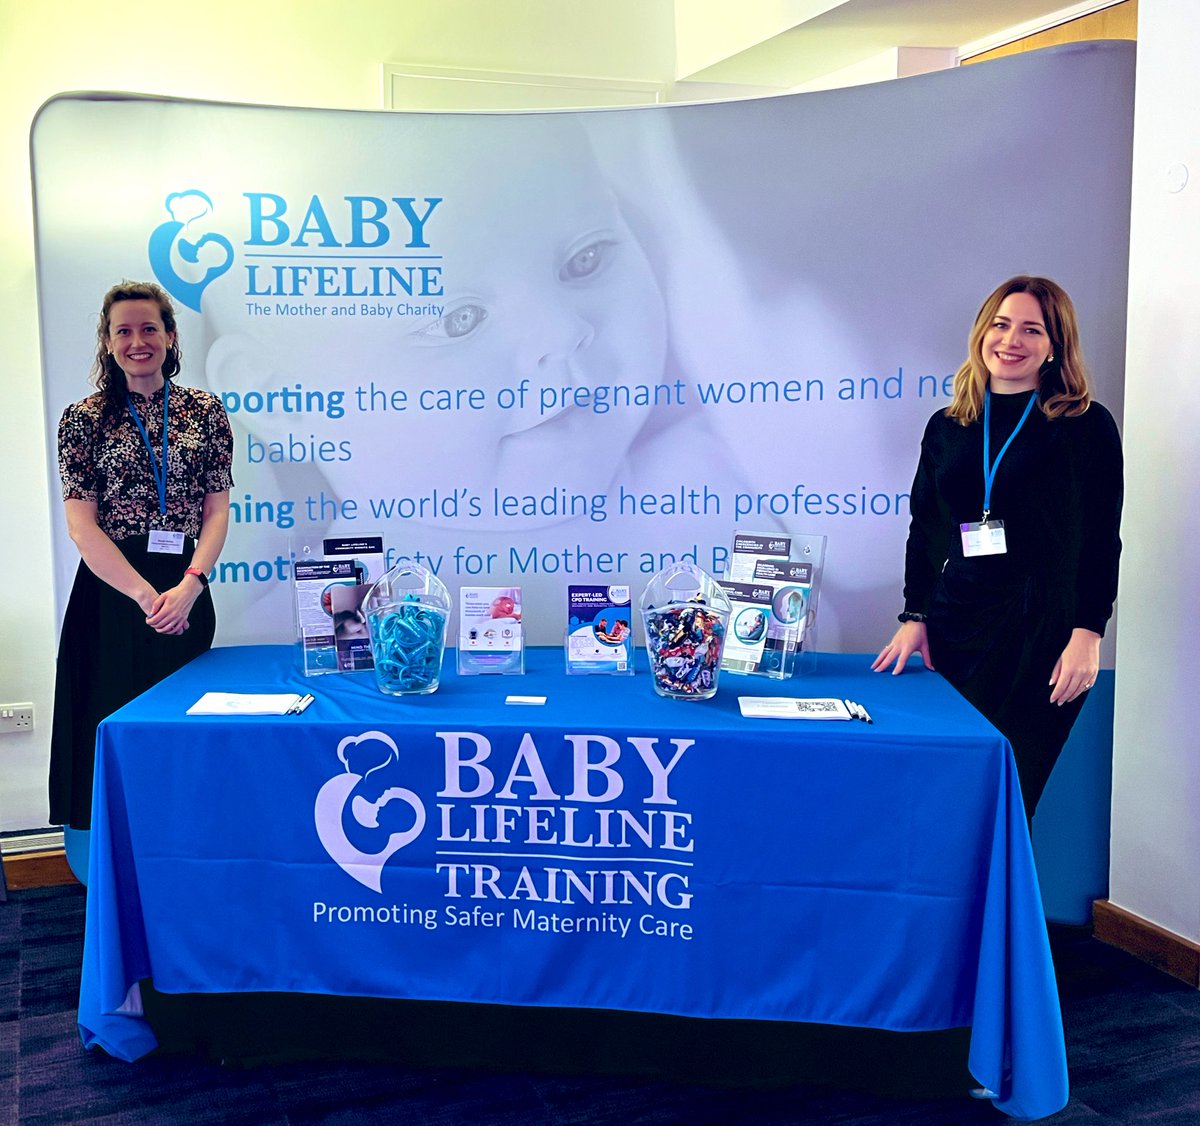 We’re so proud to be sponsoring the @MotherhoodGroup Black Maternal Health Conference, happening today in London. Find us in the exhibition space for goodies and #maternitysafety chat! #BMHCUK24